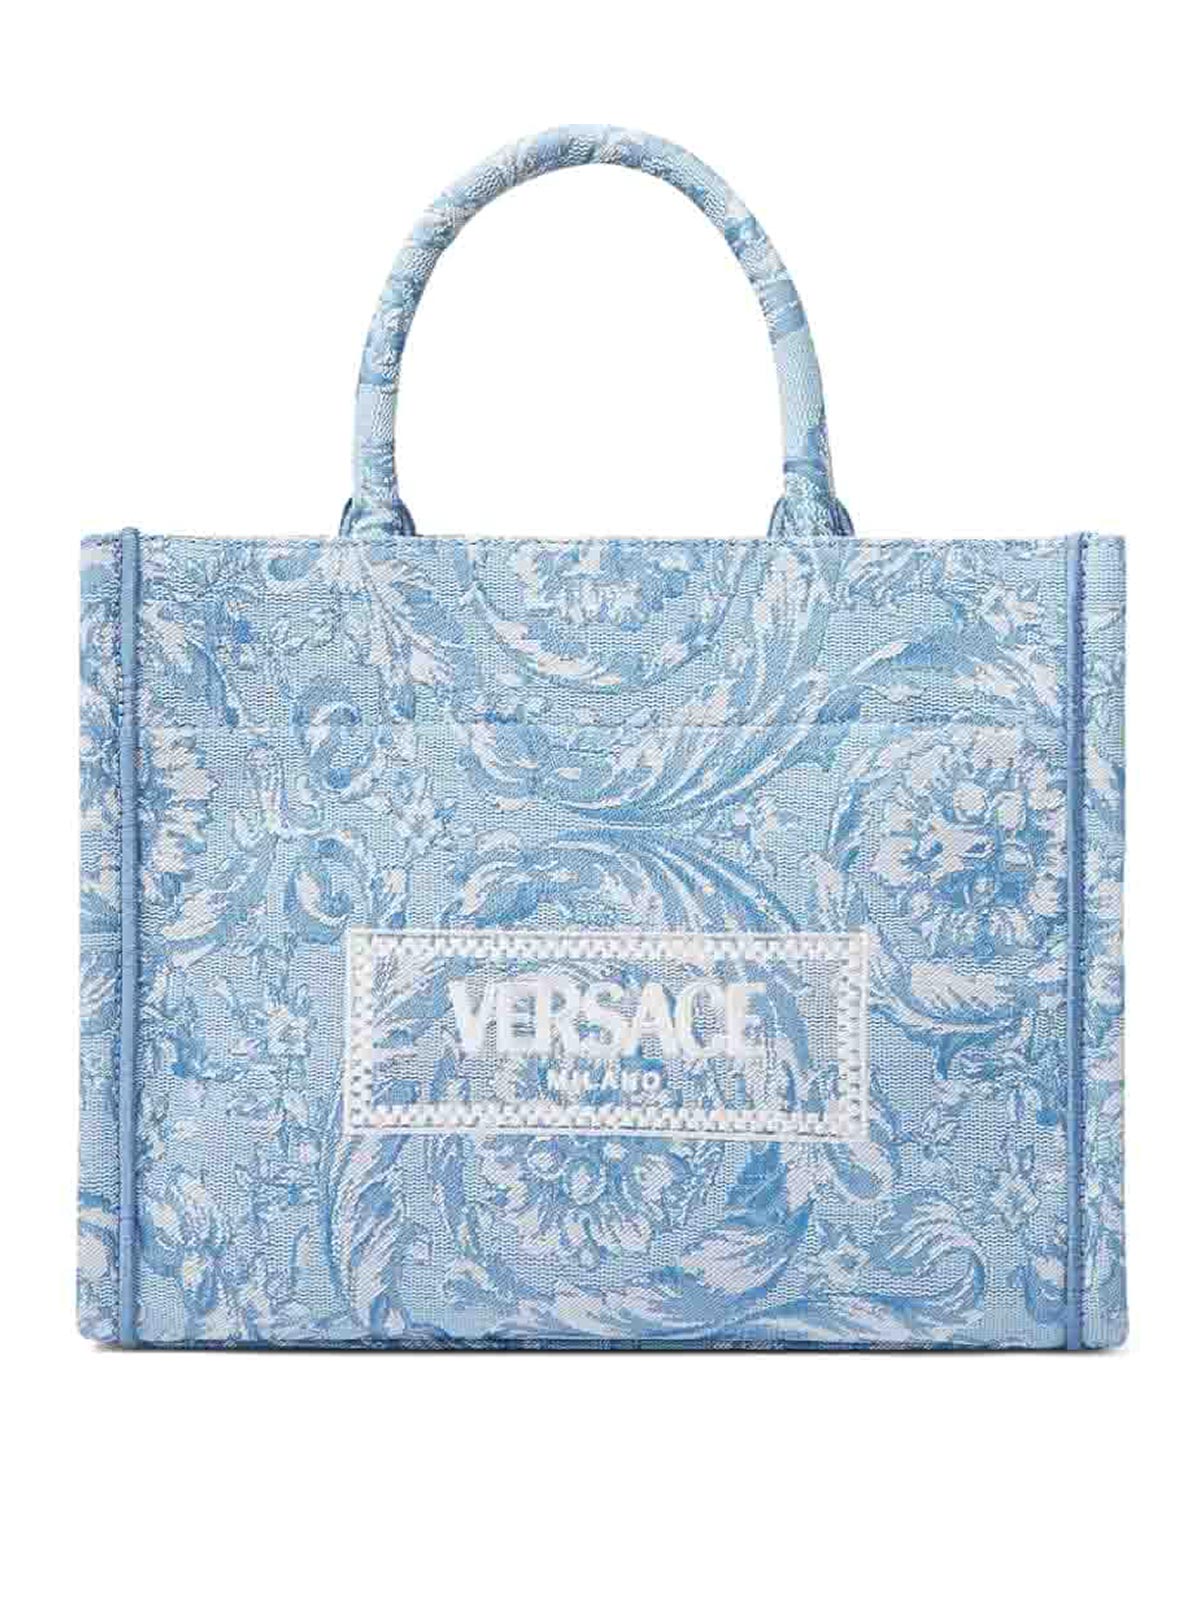 Versace Athena Bag In Blue